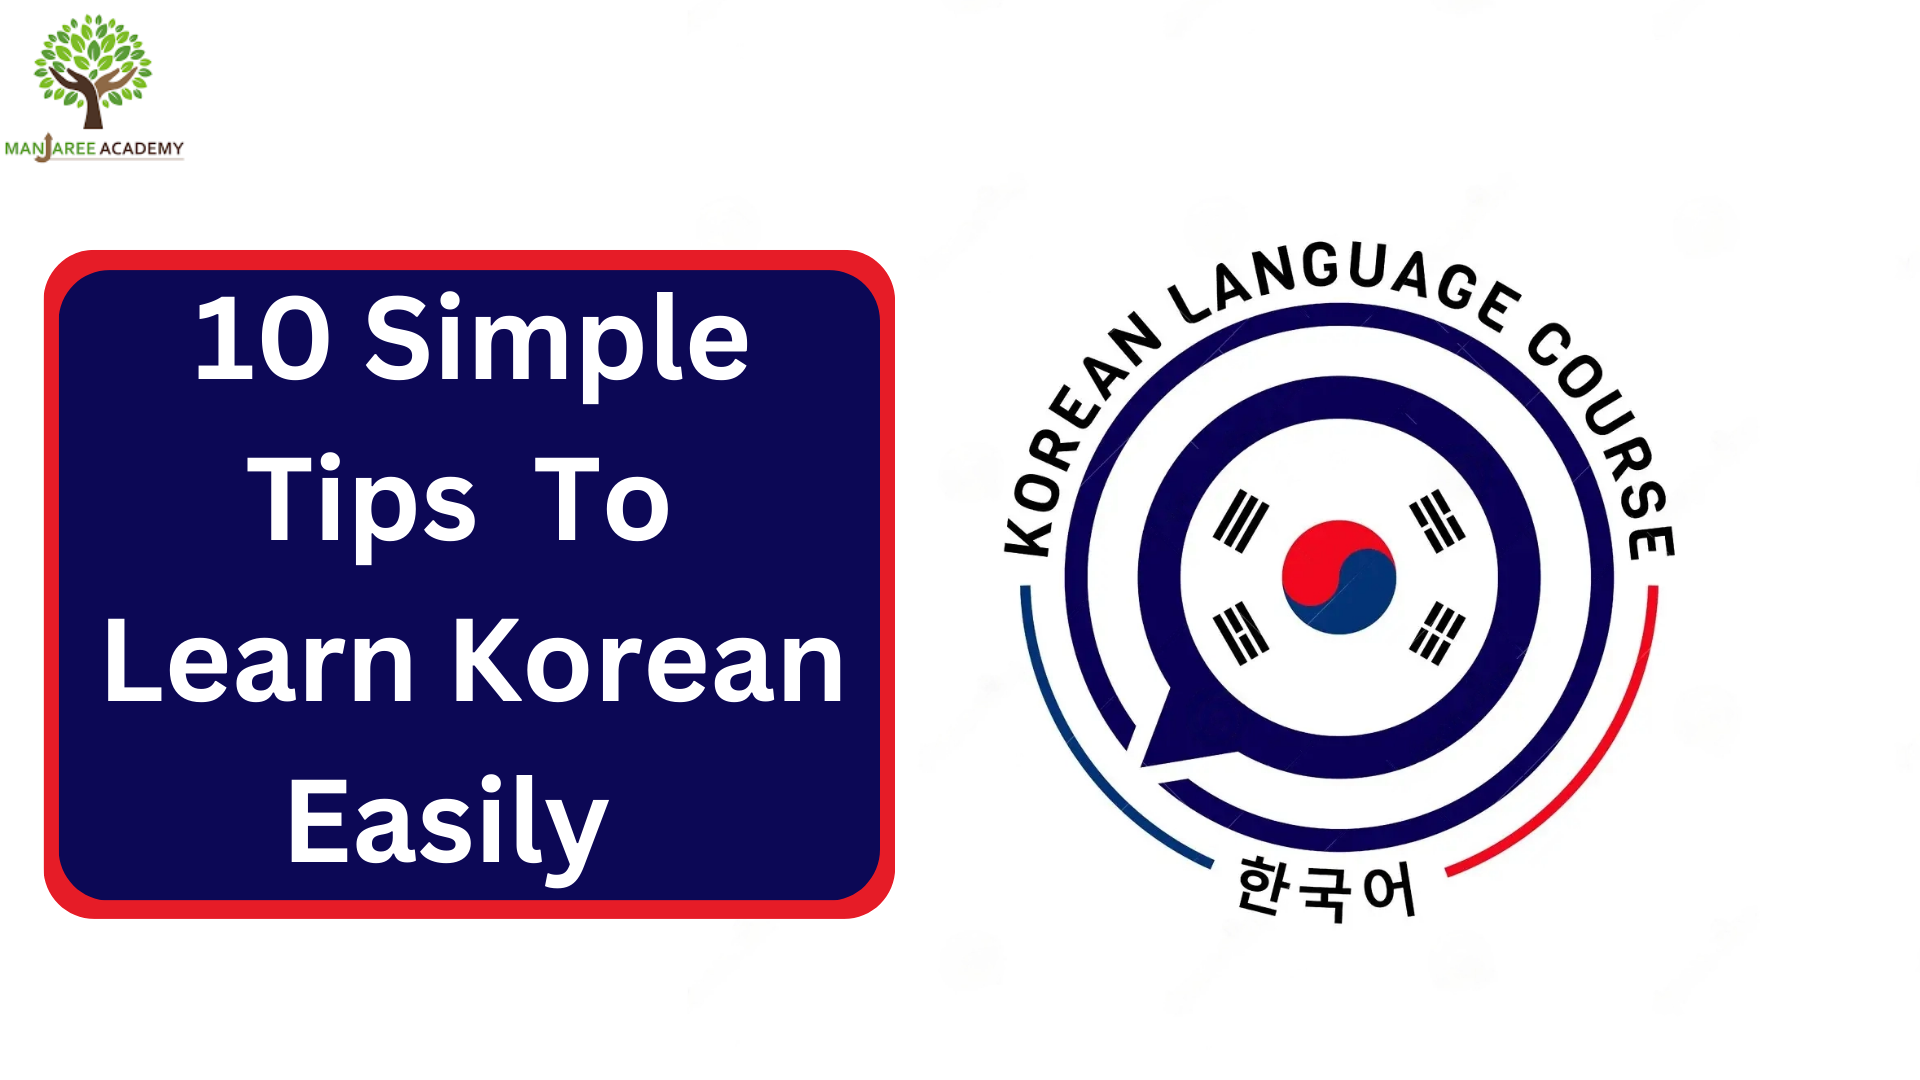 How To Learn Korean Easily With 10 Simple Tips